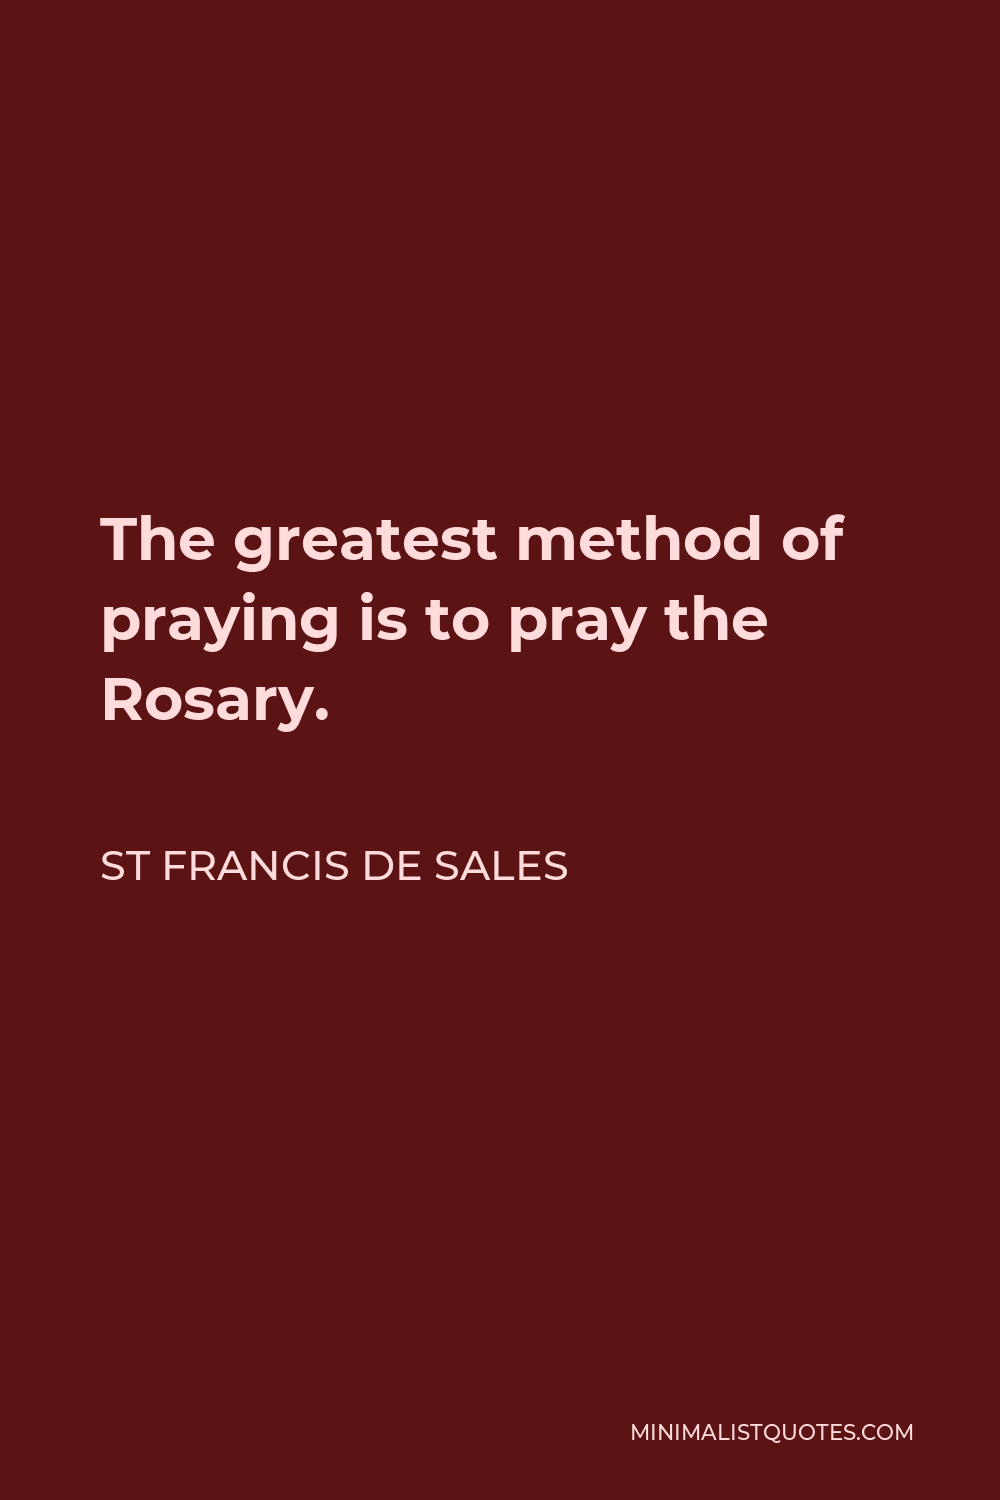 St Francis De Sales Quote - The greatest method of praying is to pray the Rosary.